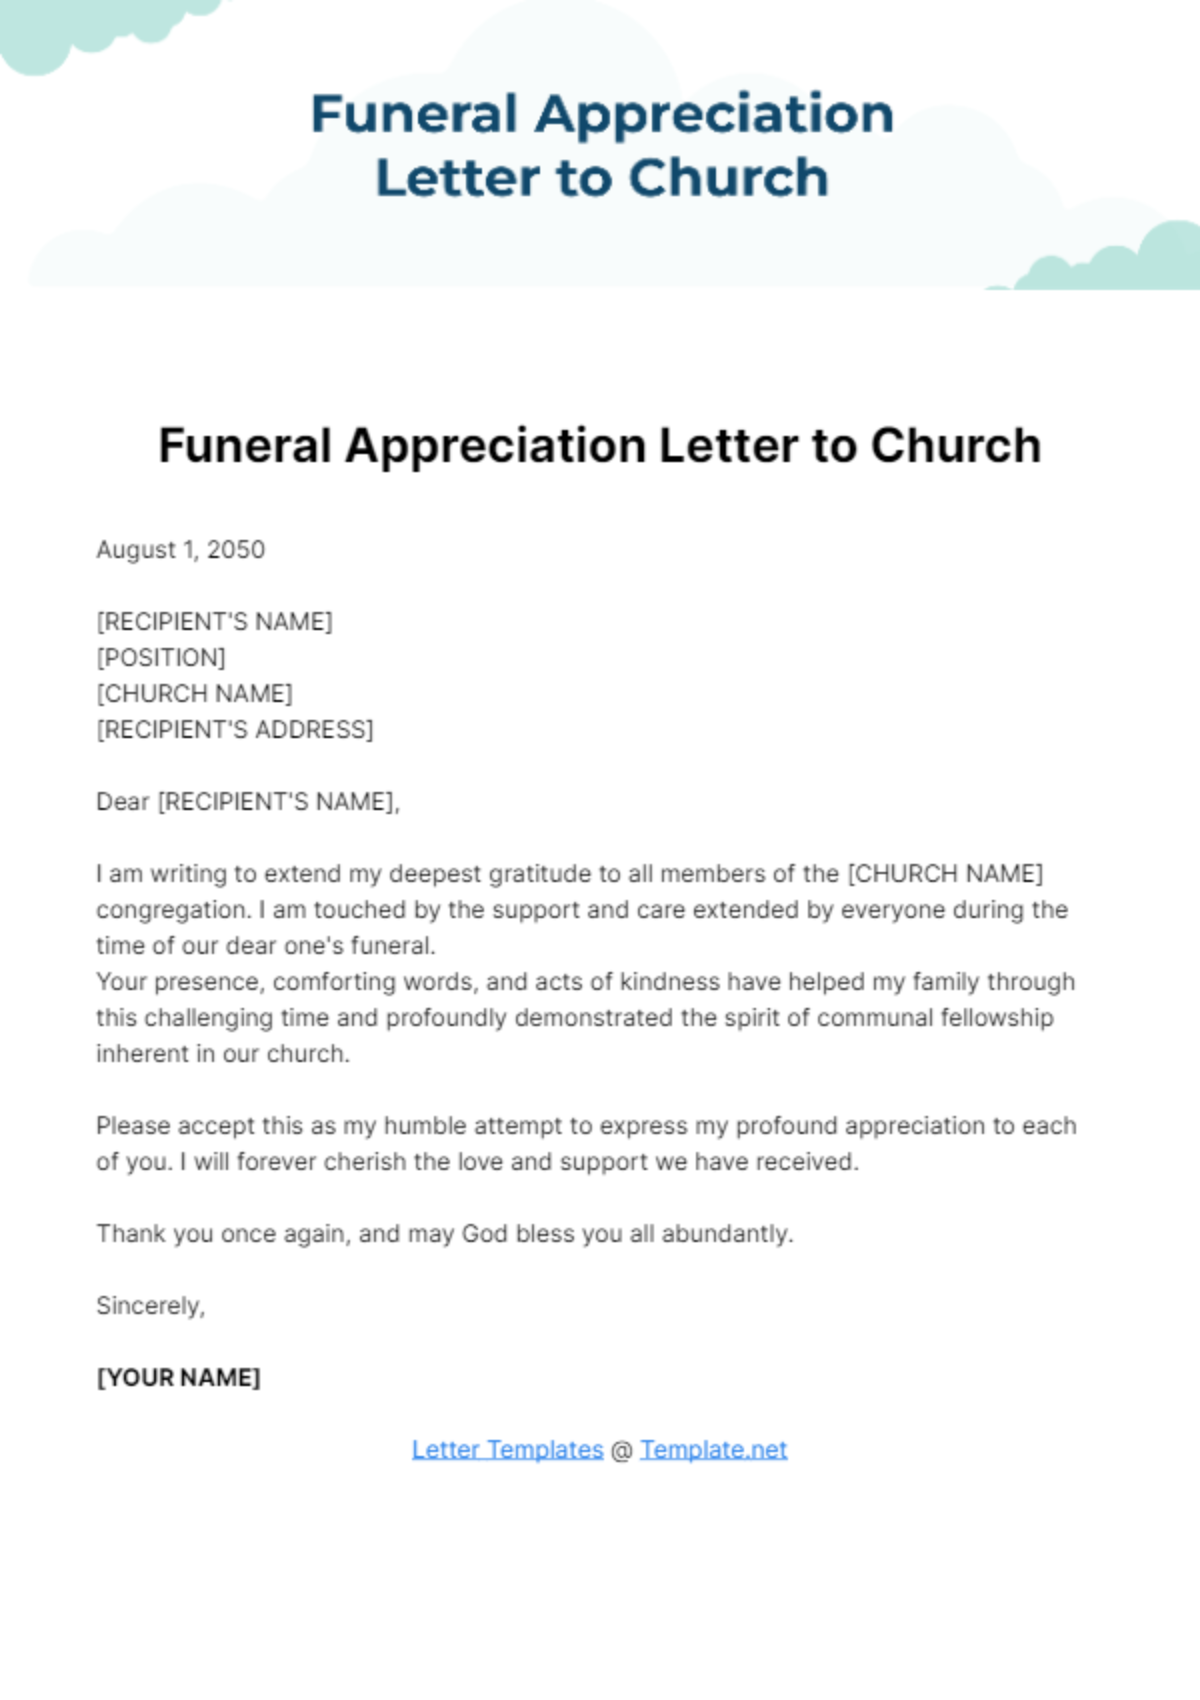 Free Funeral Appreciation Letter to Church Template